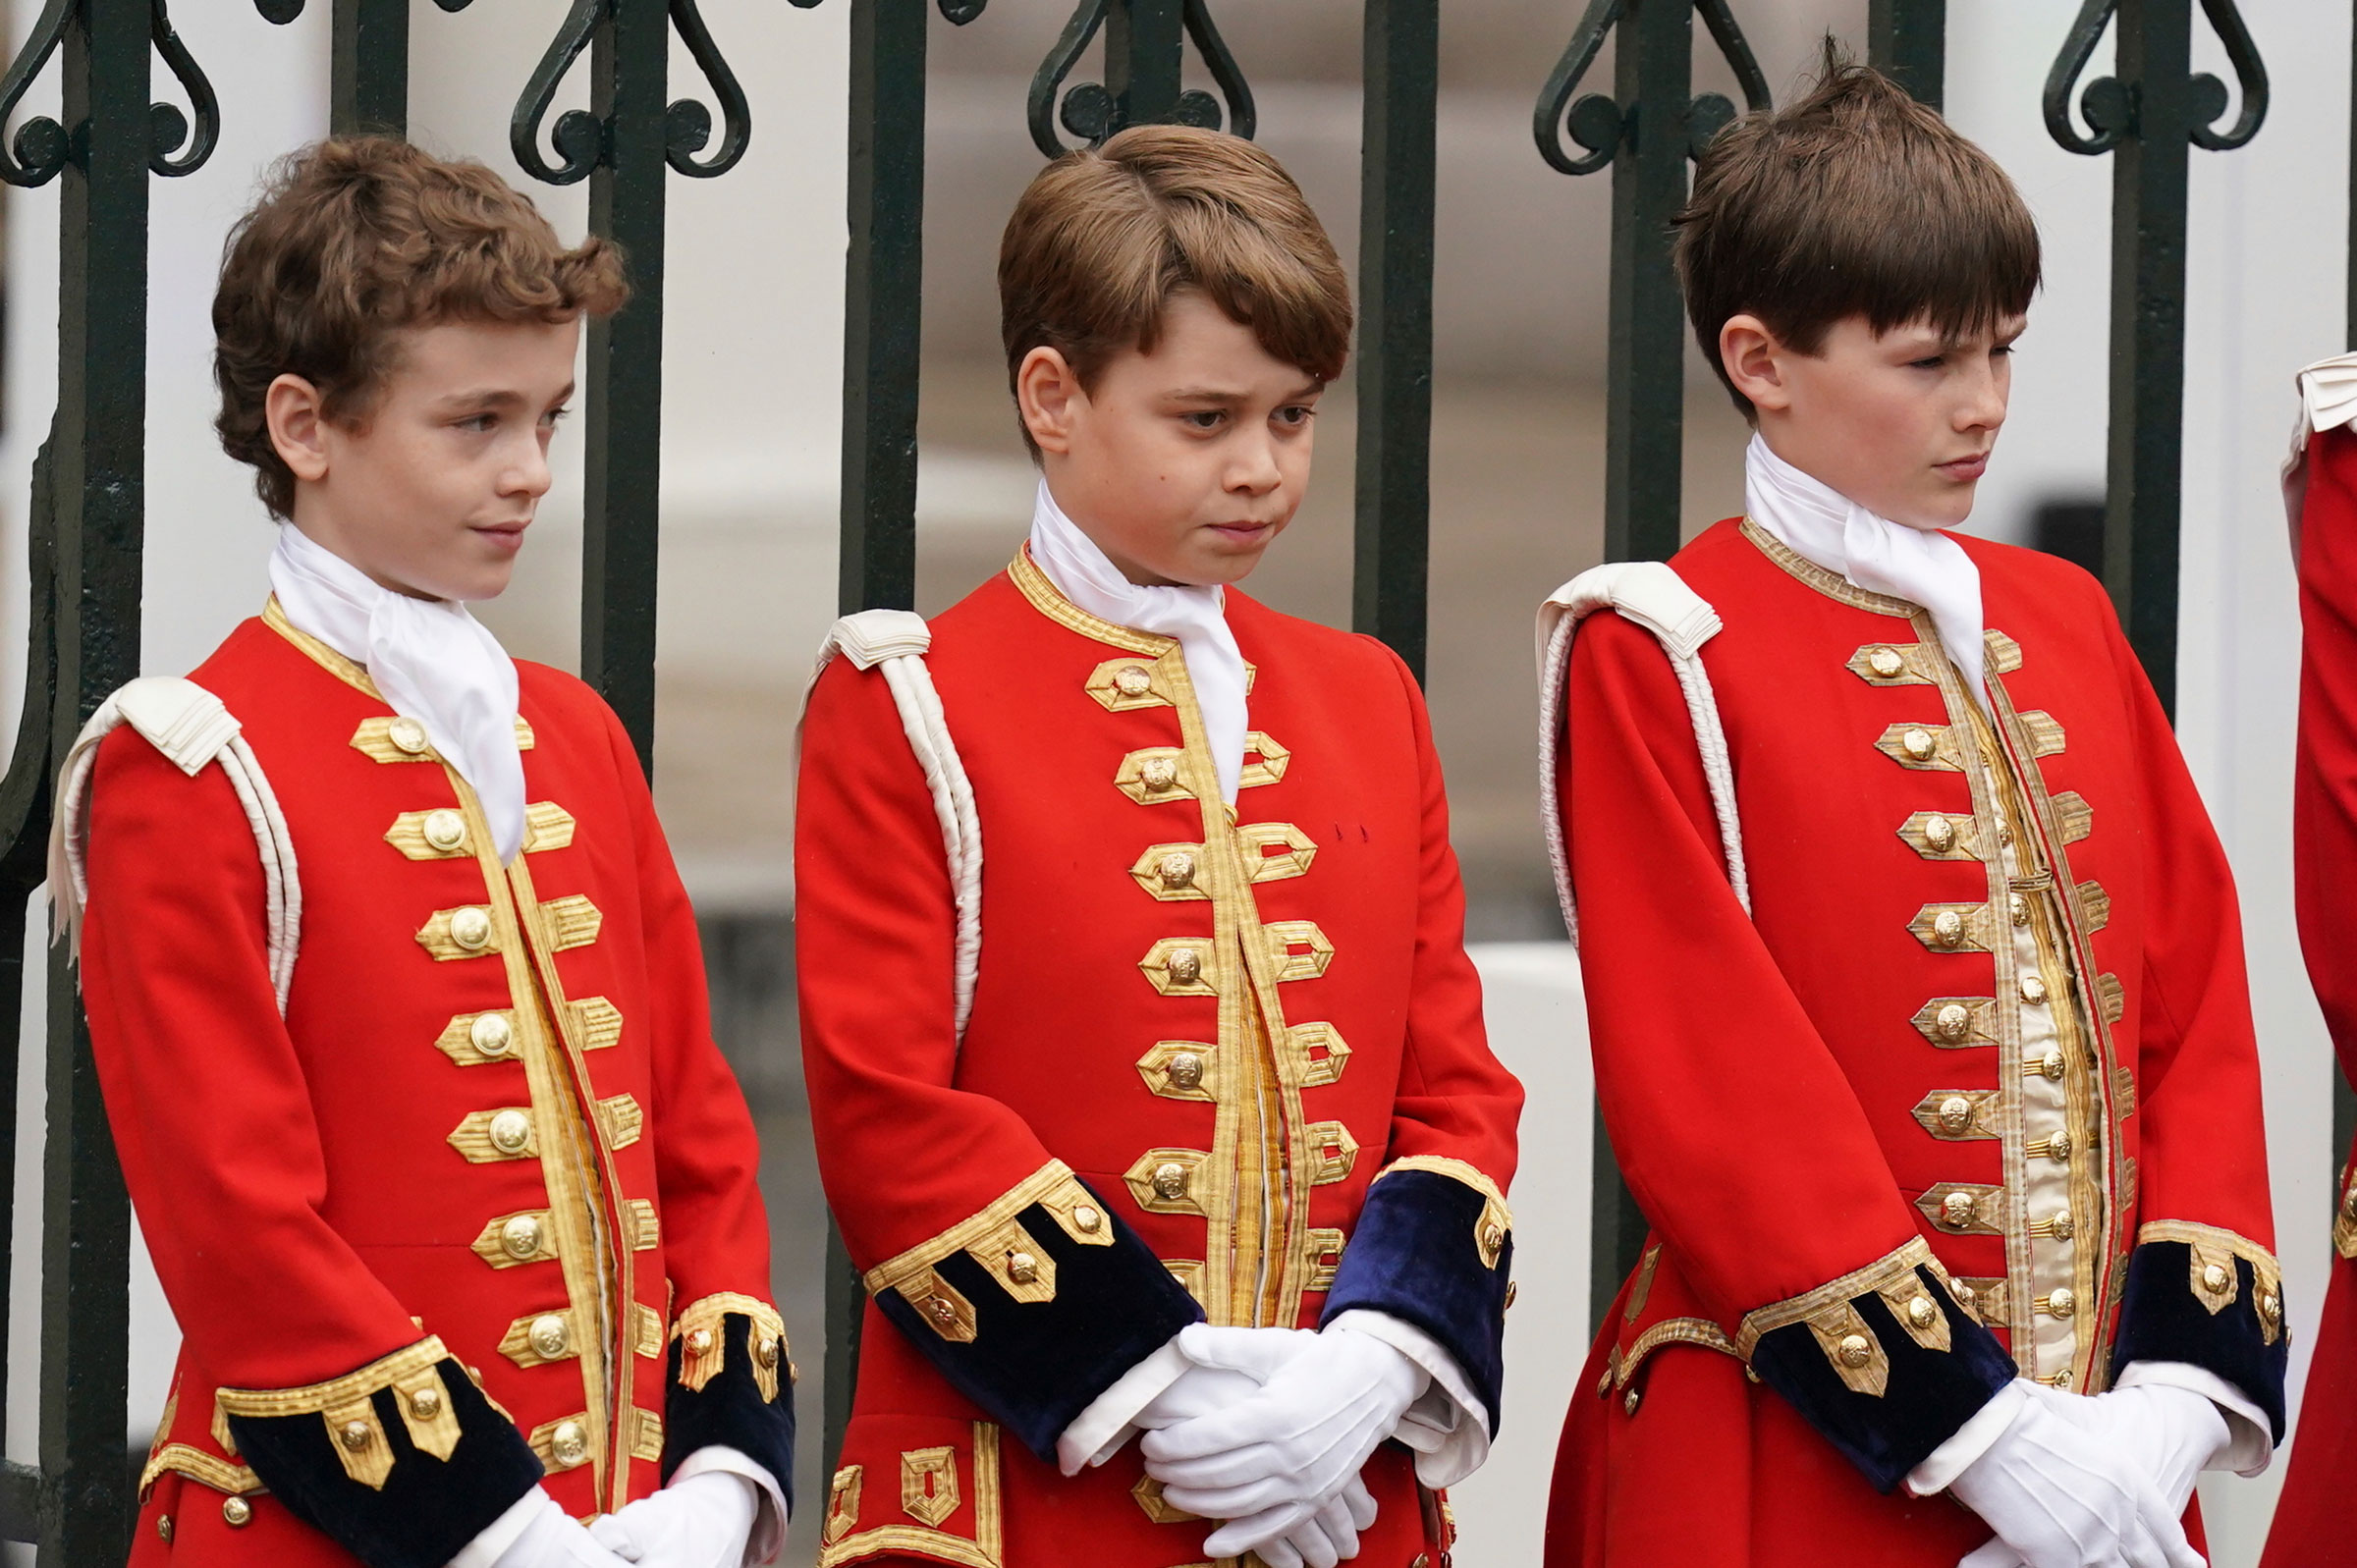 Prince George (middle) as one of four Pages of Honour ahead of the coronation ceremony. (Jacob King—PA Wire/AP)